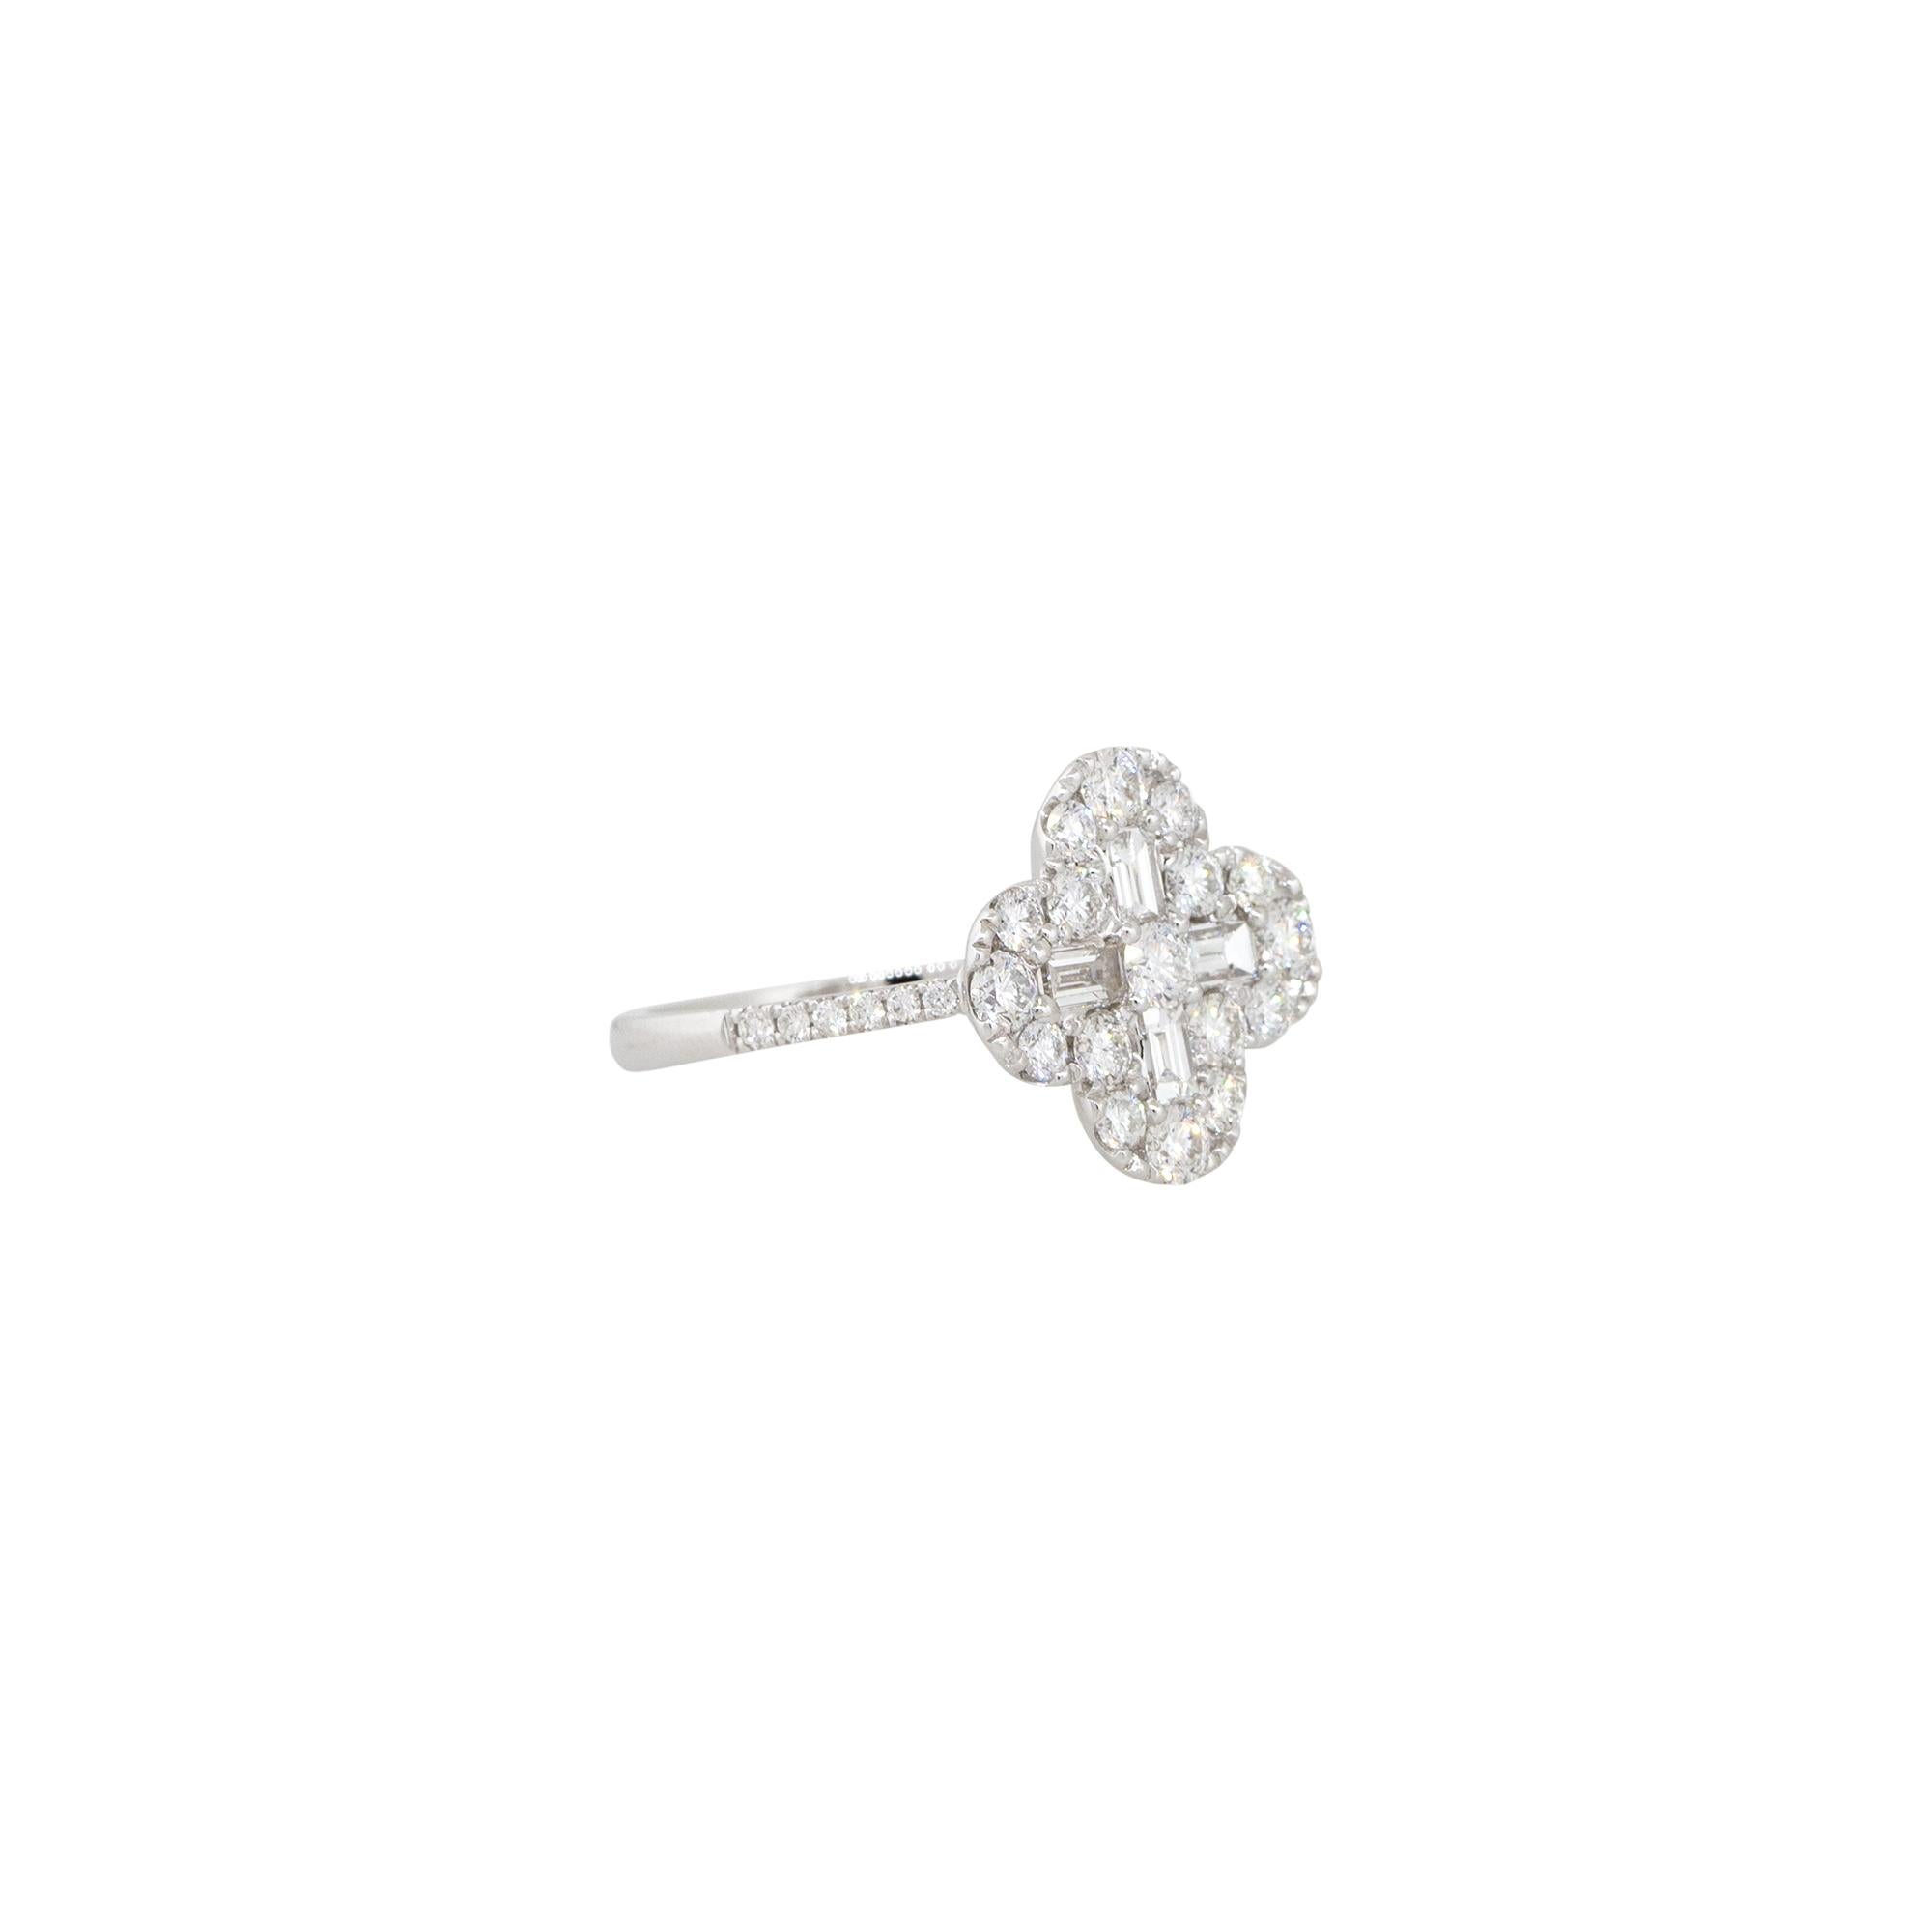 18k White Gold 1.22ctw Diamond Clover Style Ring

Style: Women's Diamond Clover Style Ring
Material: 18k White Gold
Main Diamond Details: Approximately 1.22ctw of Round Brilliant and Baguette Cut Diamonds. Diamonds are prong set and there are 33